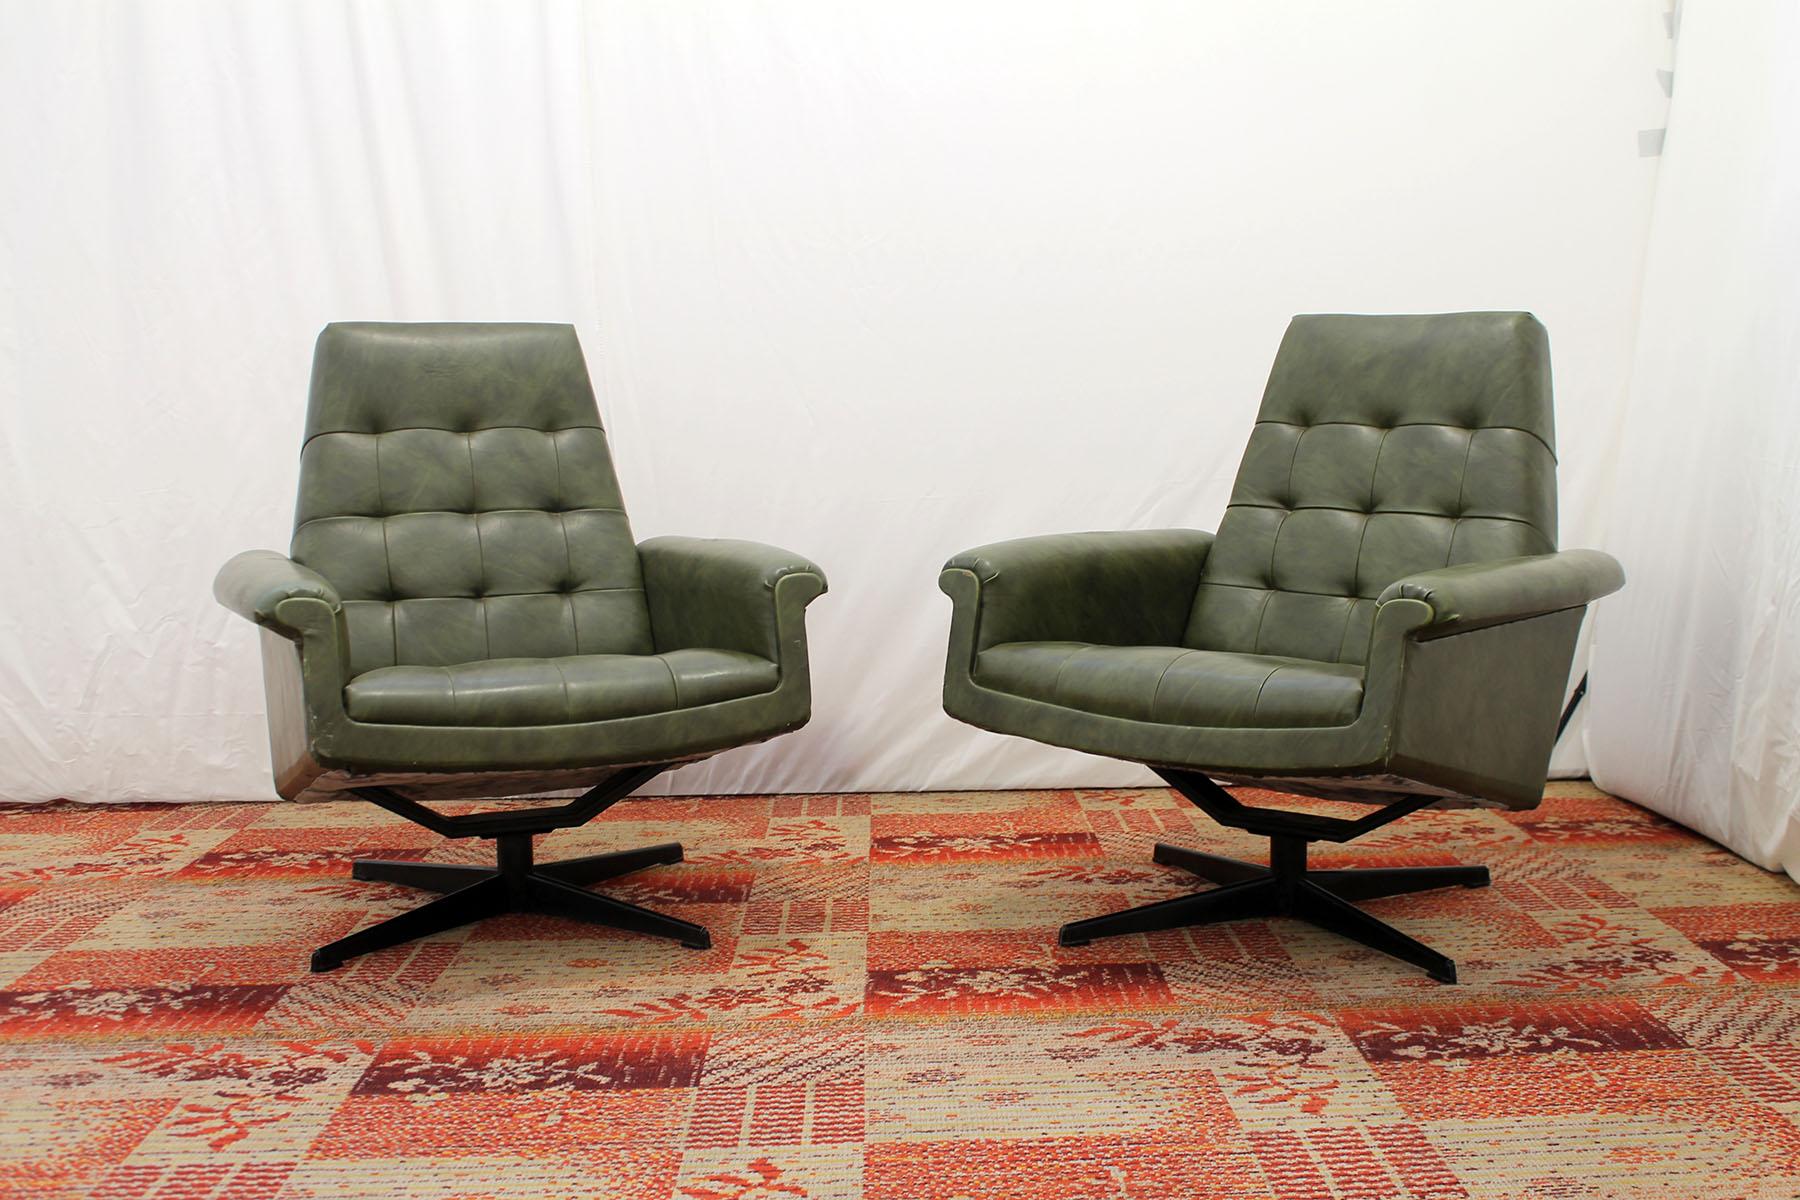 Pair of swivel armchairs from the 1970s manufactured by UP Zavody in the former Czechoslovakia.
This type of chair is characterized by an innovative molded extended construction.
These iconic chairs have a slightly curved shaped design on an